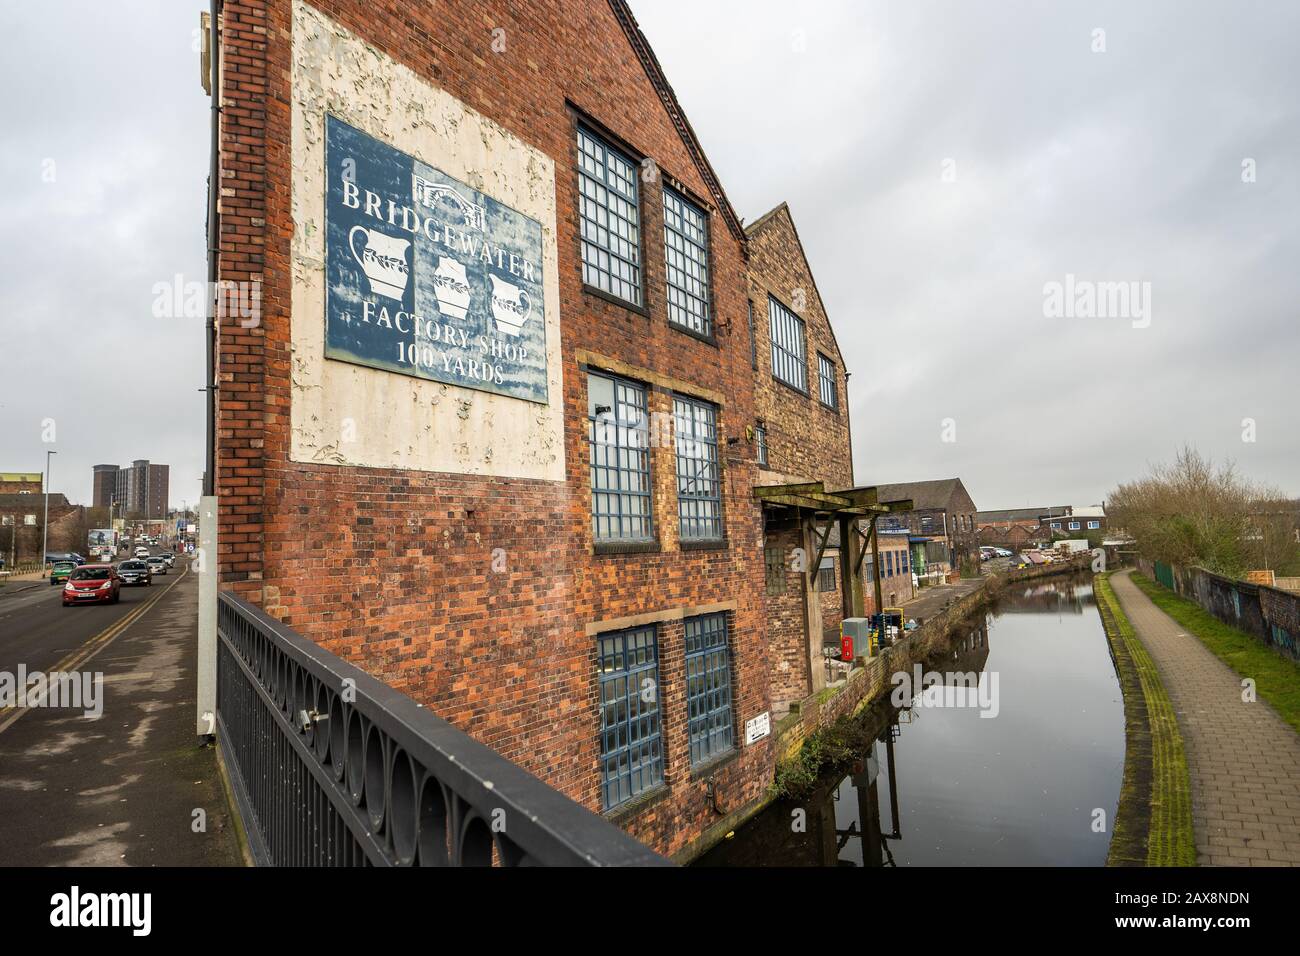 The famous Emma Bridgewater pottery factory located on Victoria road, Vicky road, Lichfied street, creators of handmade pottery, bottle kilns Stock Photo